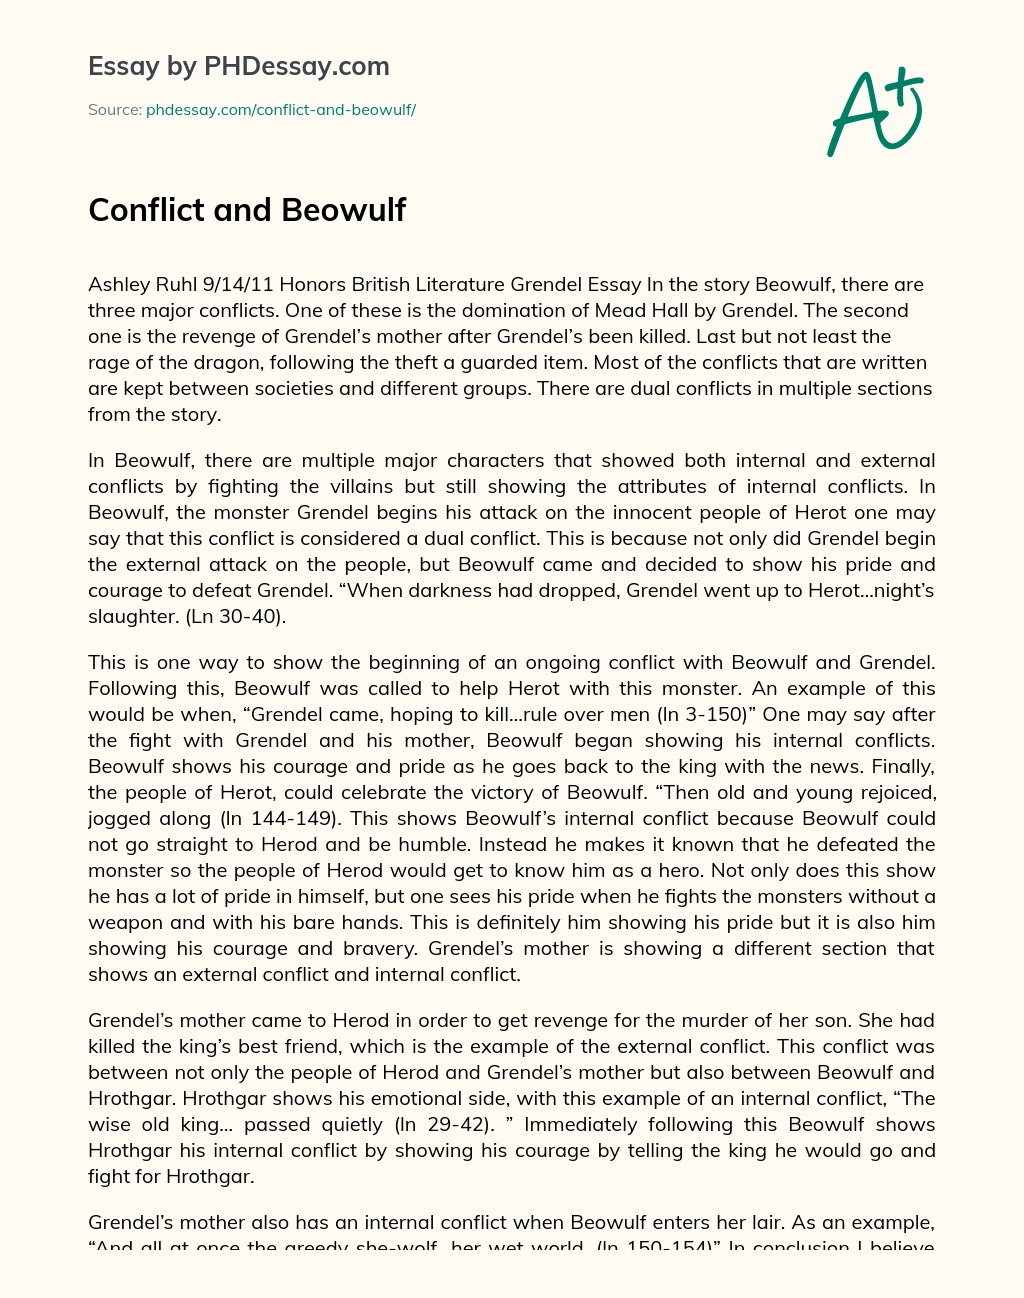 Conflict and Beowulf essay